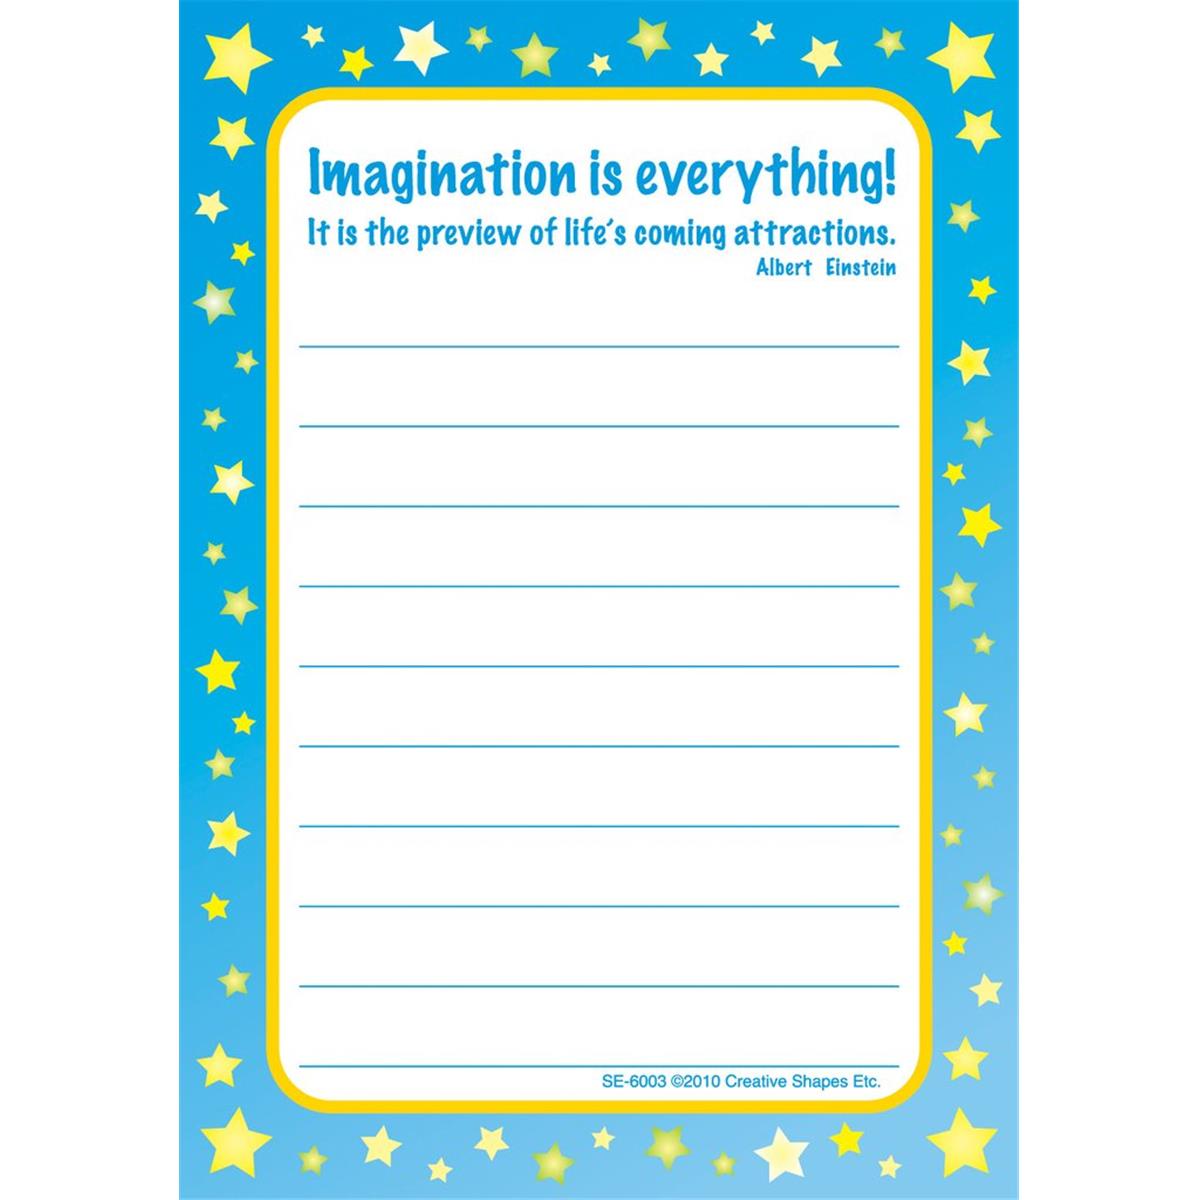 Se-6003 3.5 X 5 In. Notes & Quotes, Imagination - 35 Sheets Per Pack